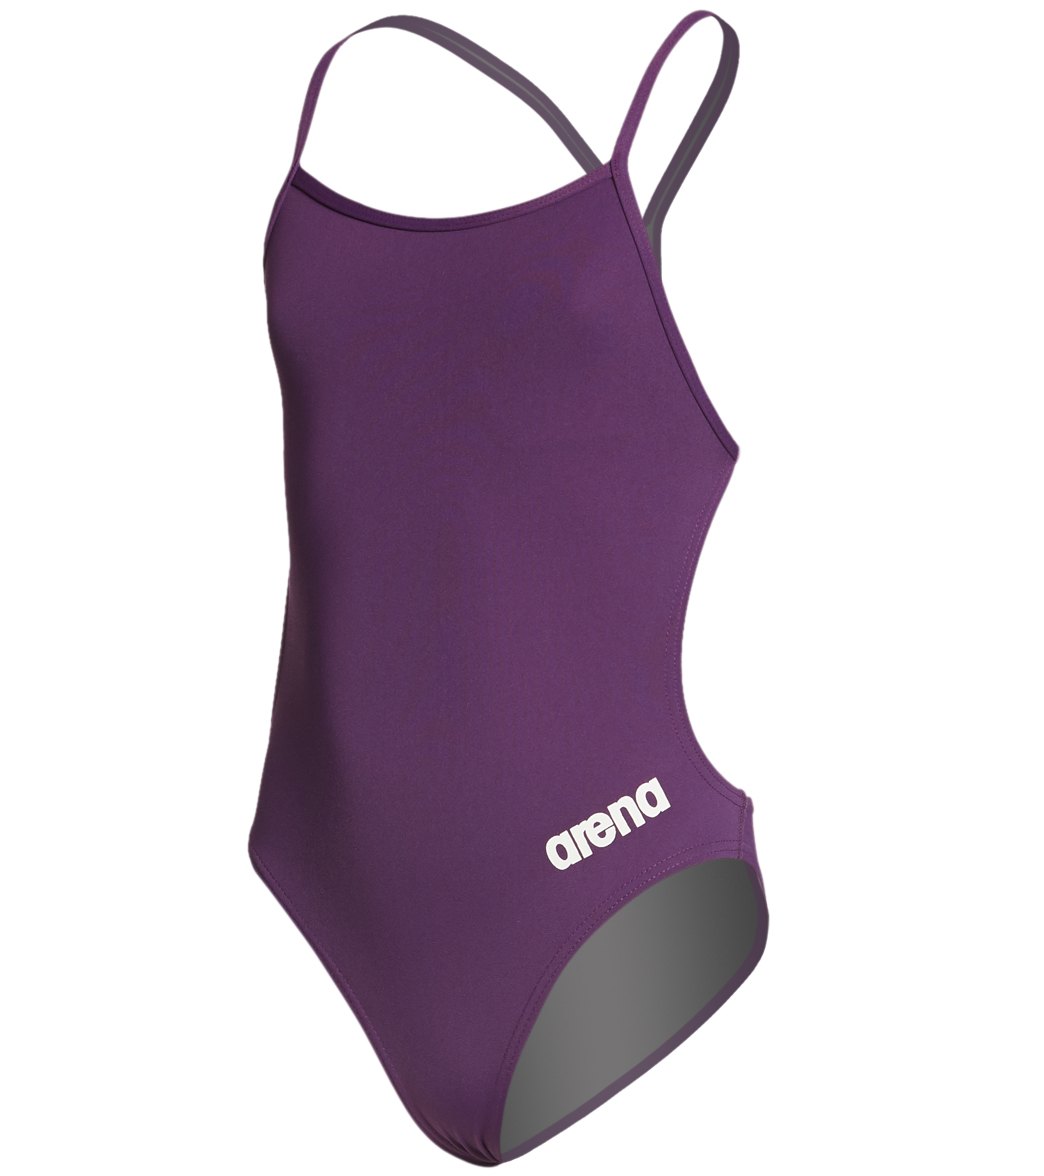 Arena Girl's Mast Maxlife Thin Strap Open Racer Back One Piece Swimsuit - Plum/White 22 Polyester - Swimoutlet.com